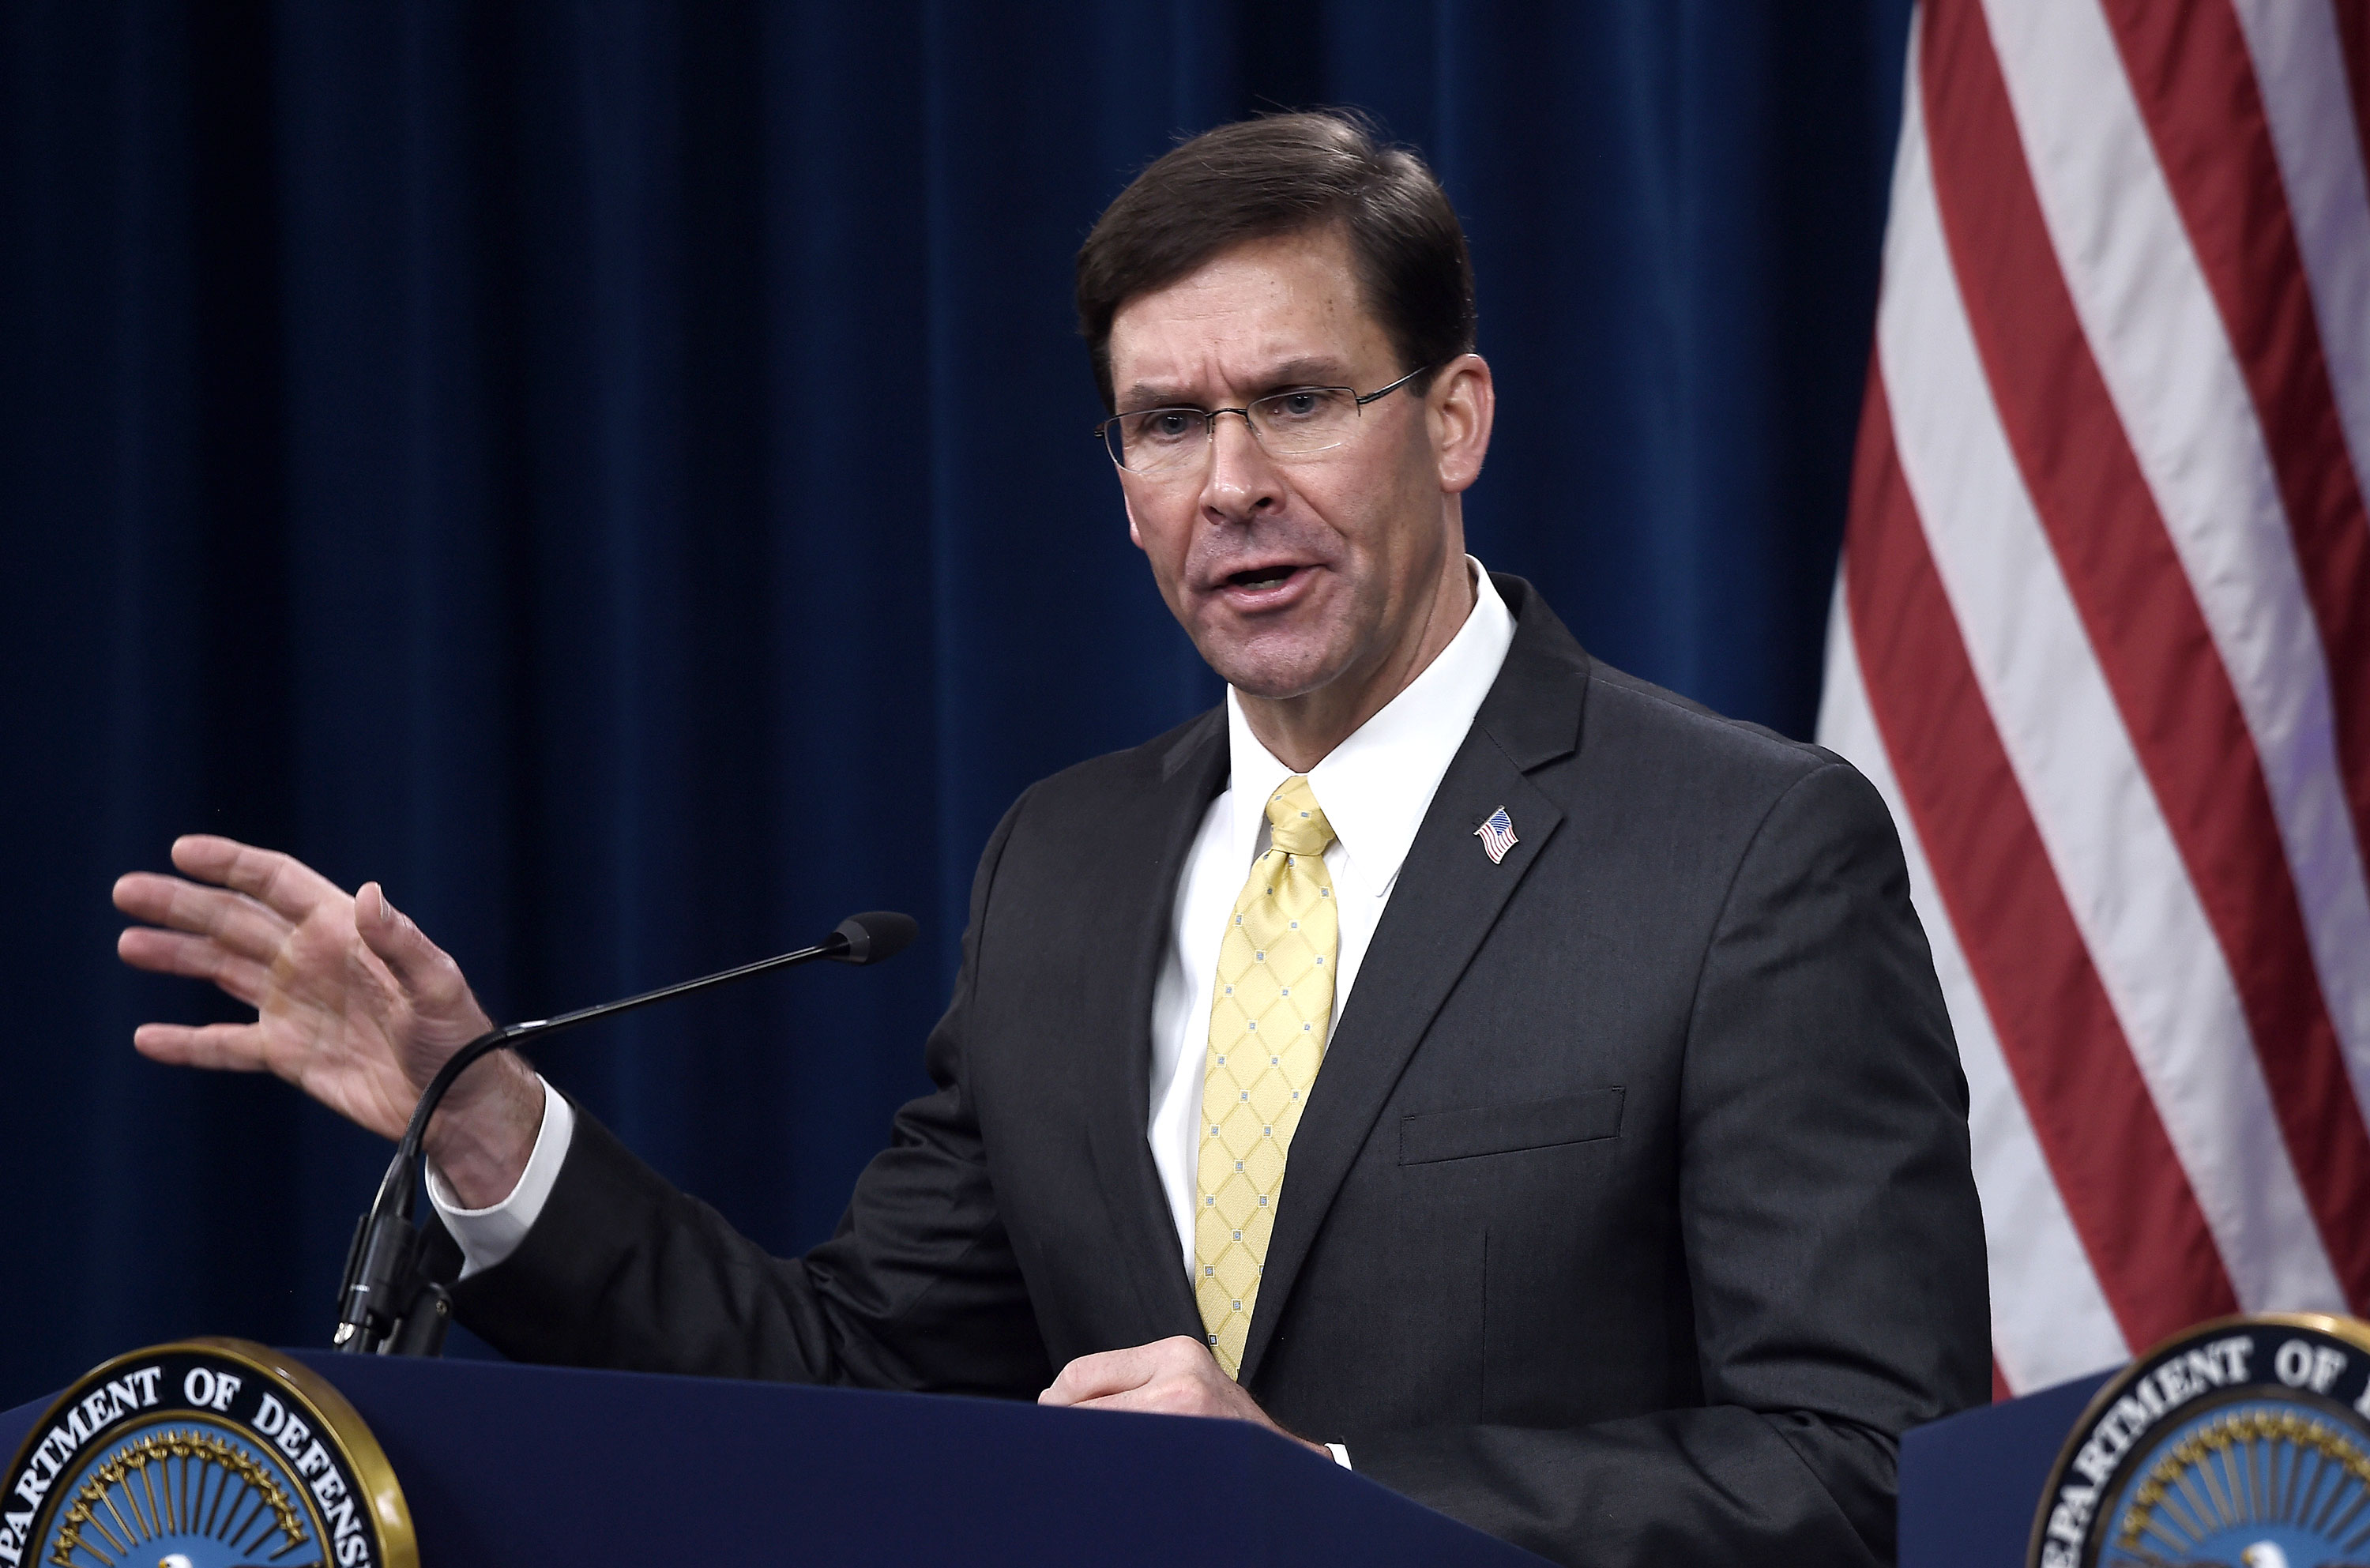 Defense Secretary Mark Esper speaks at a press conference on March 5 in Washington, DC. (Photo by Olivier DOULIERY / AFP) (Photo by OLIVIER DOULIERY/AFP via Getty Images)